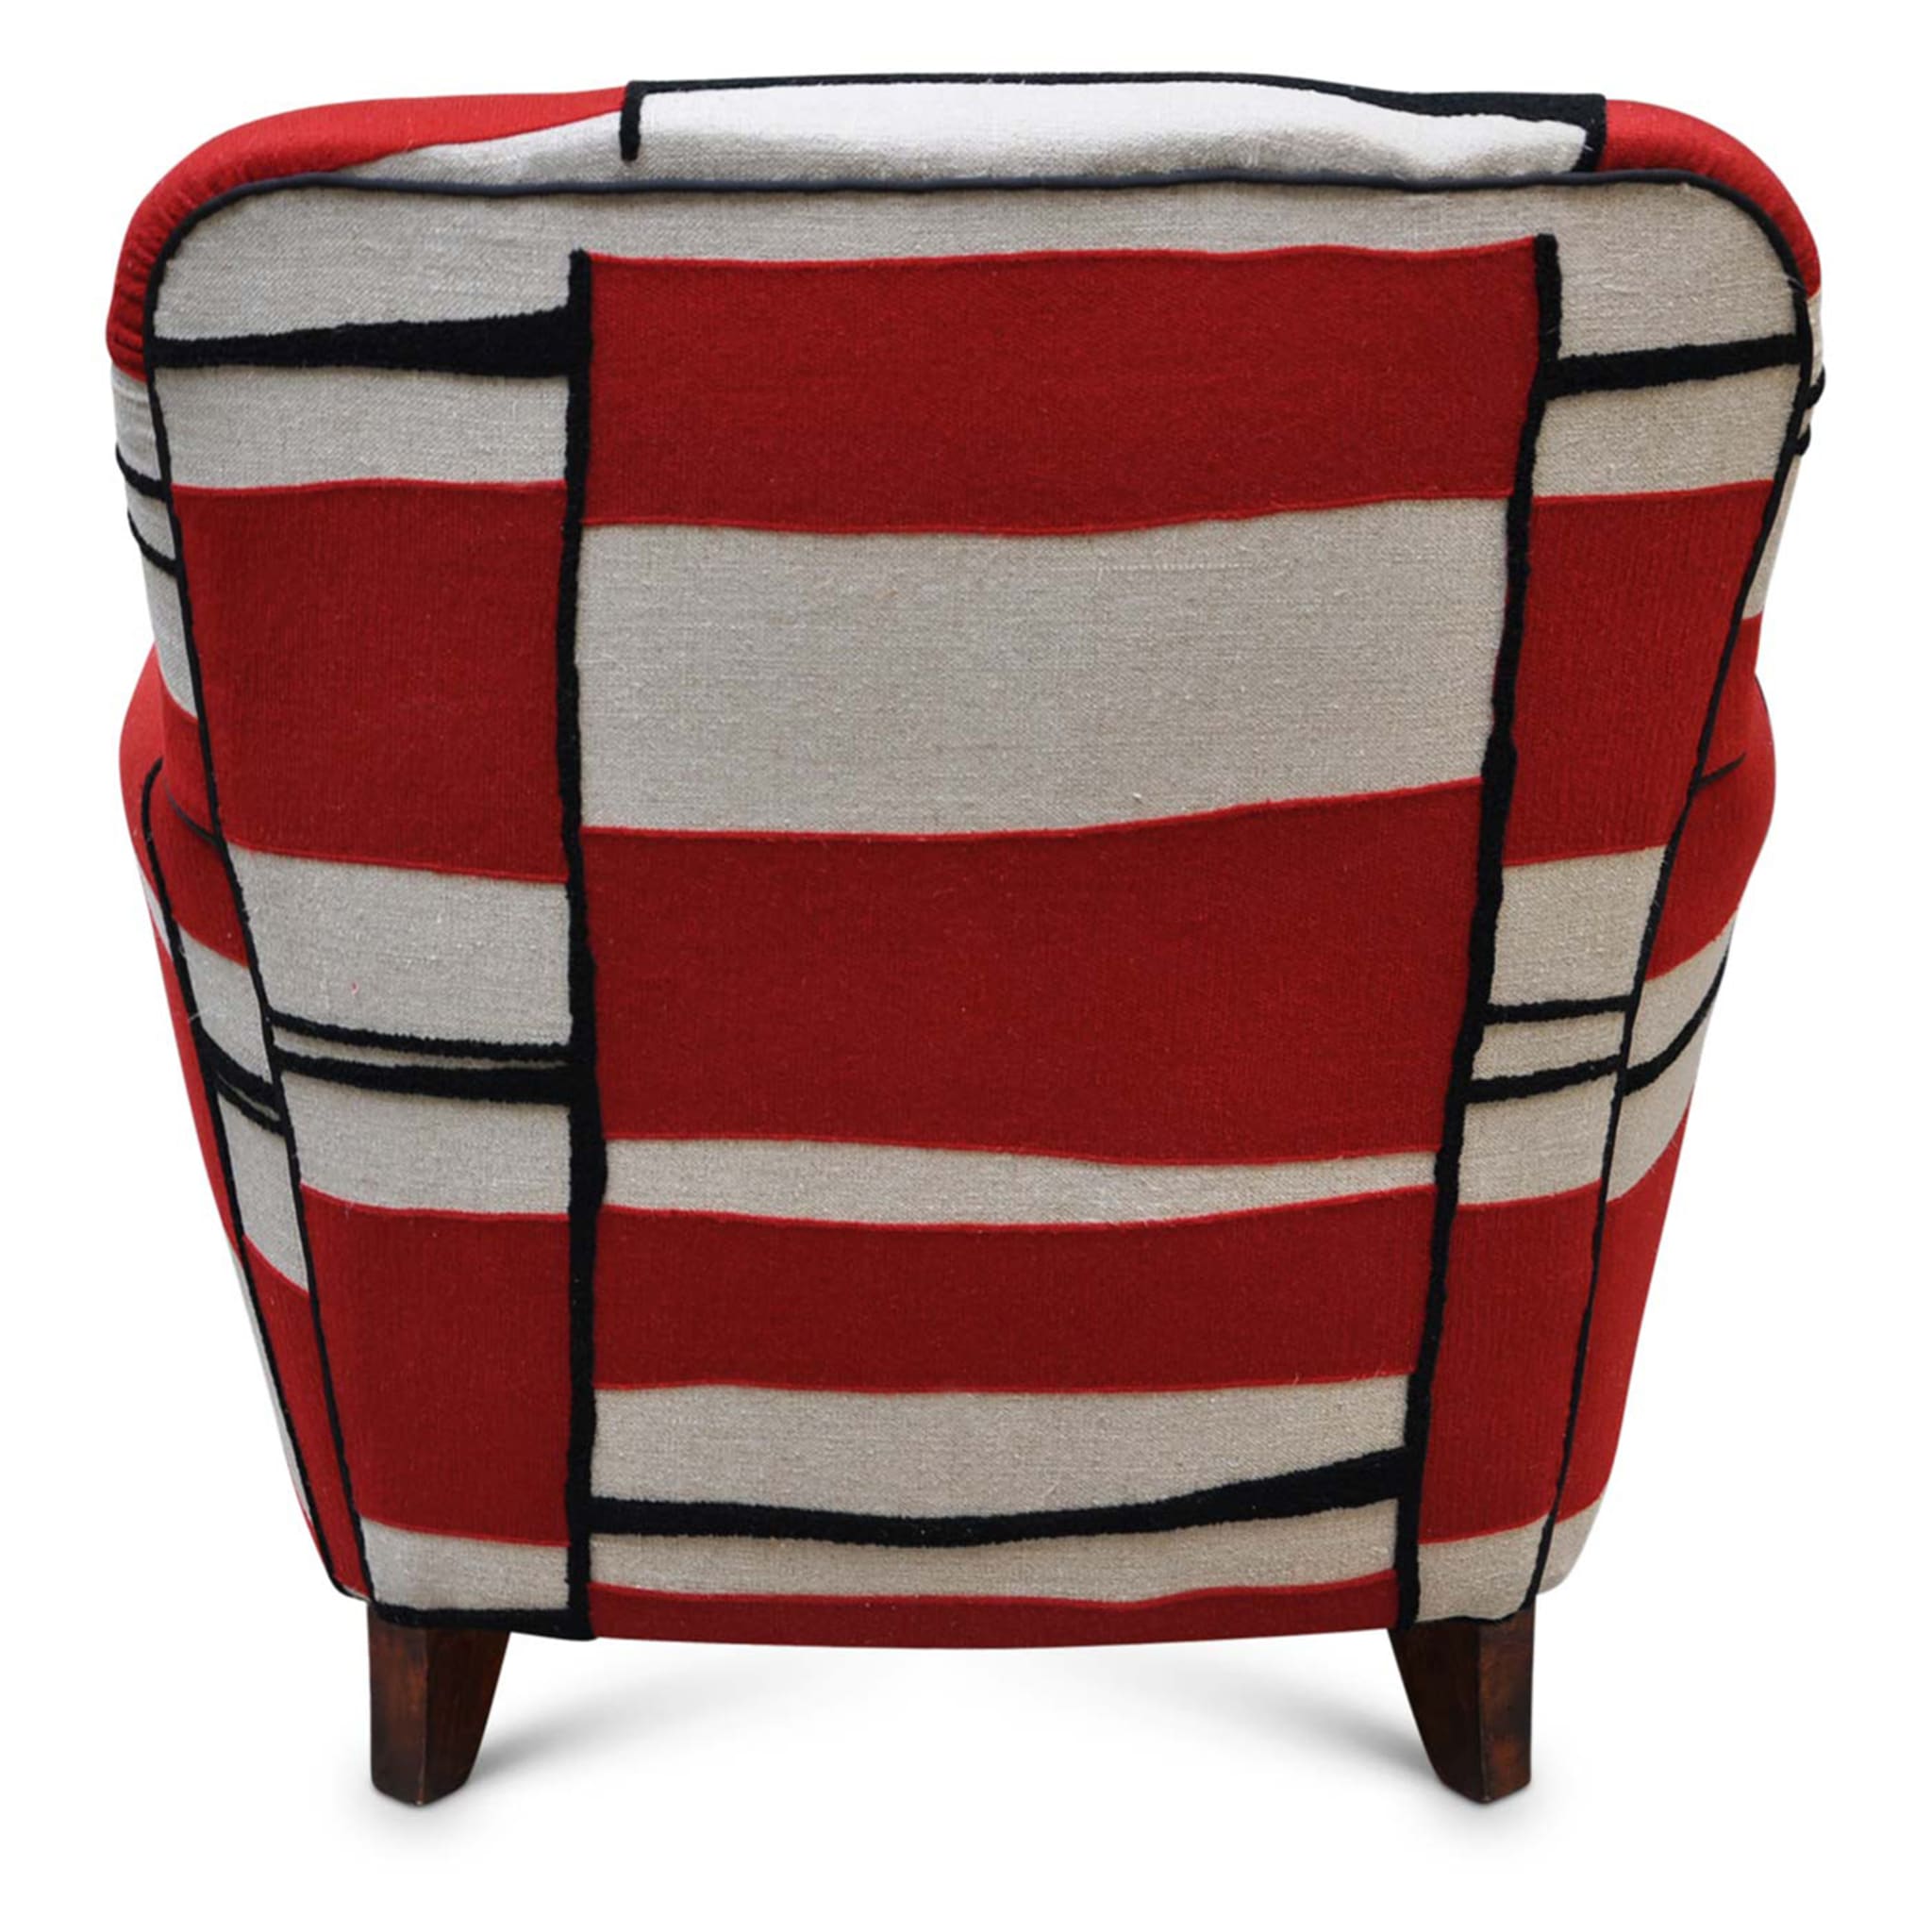 Red & White Passion Armchair - Alternative view 1